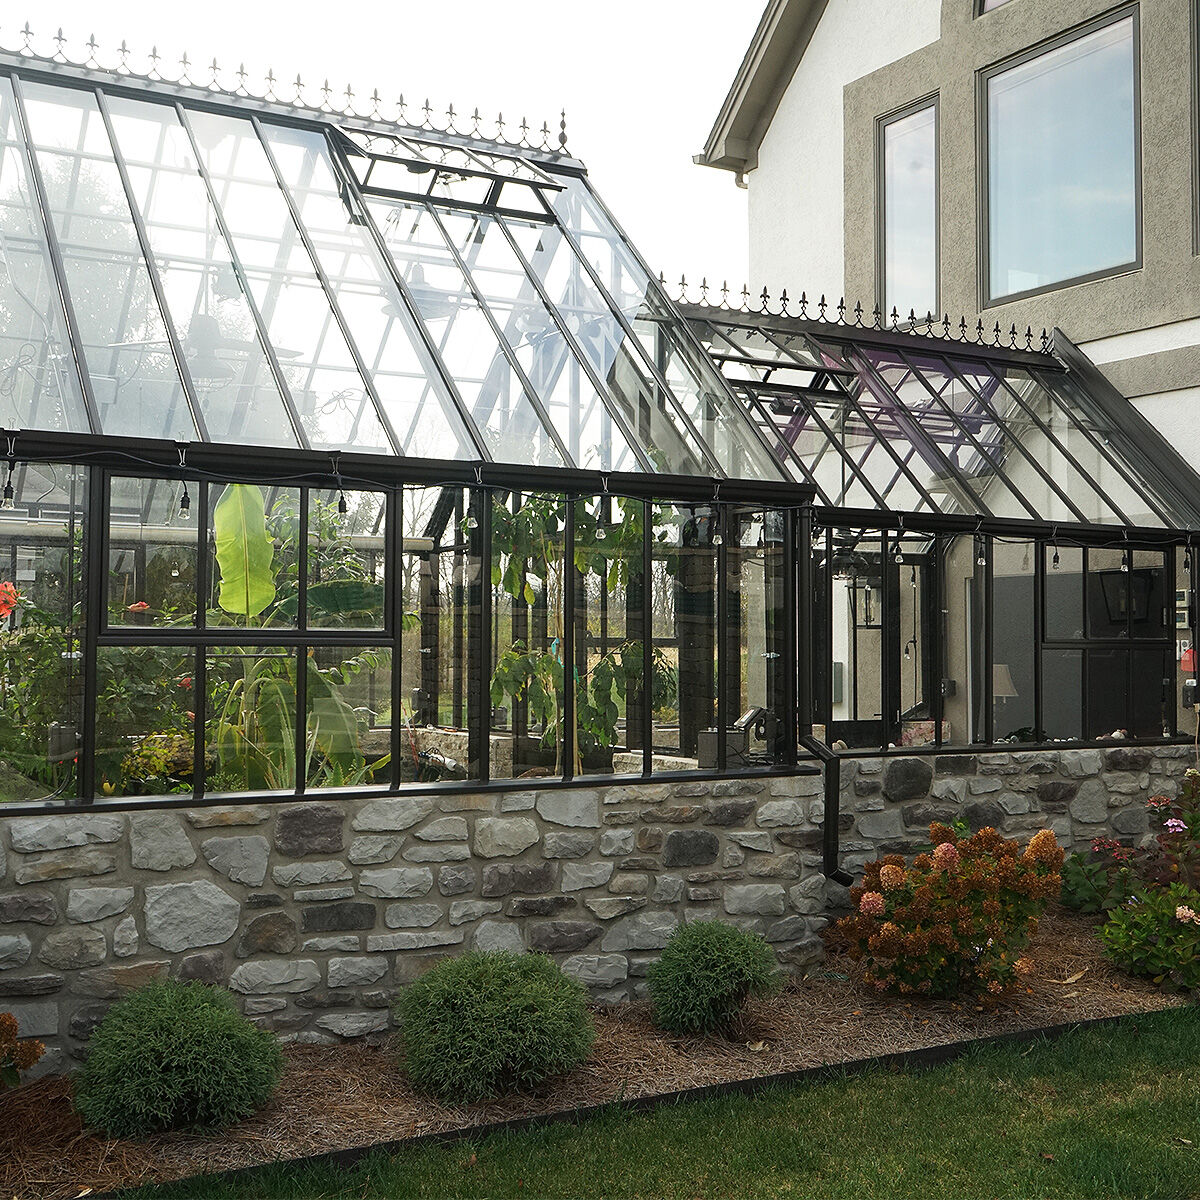 The Grand Manor 'meets' the Victorian Classic in the breathtaking form of a Bespoke Glasshouse. Bathed in the rich hues of dark bronze, welcome to a realm where tradition meets innovation, nestled in the serene landscapes of Ohia, USA. bit.ly/2YygHII